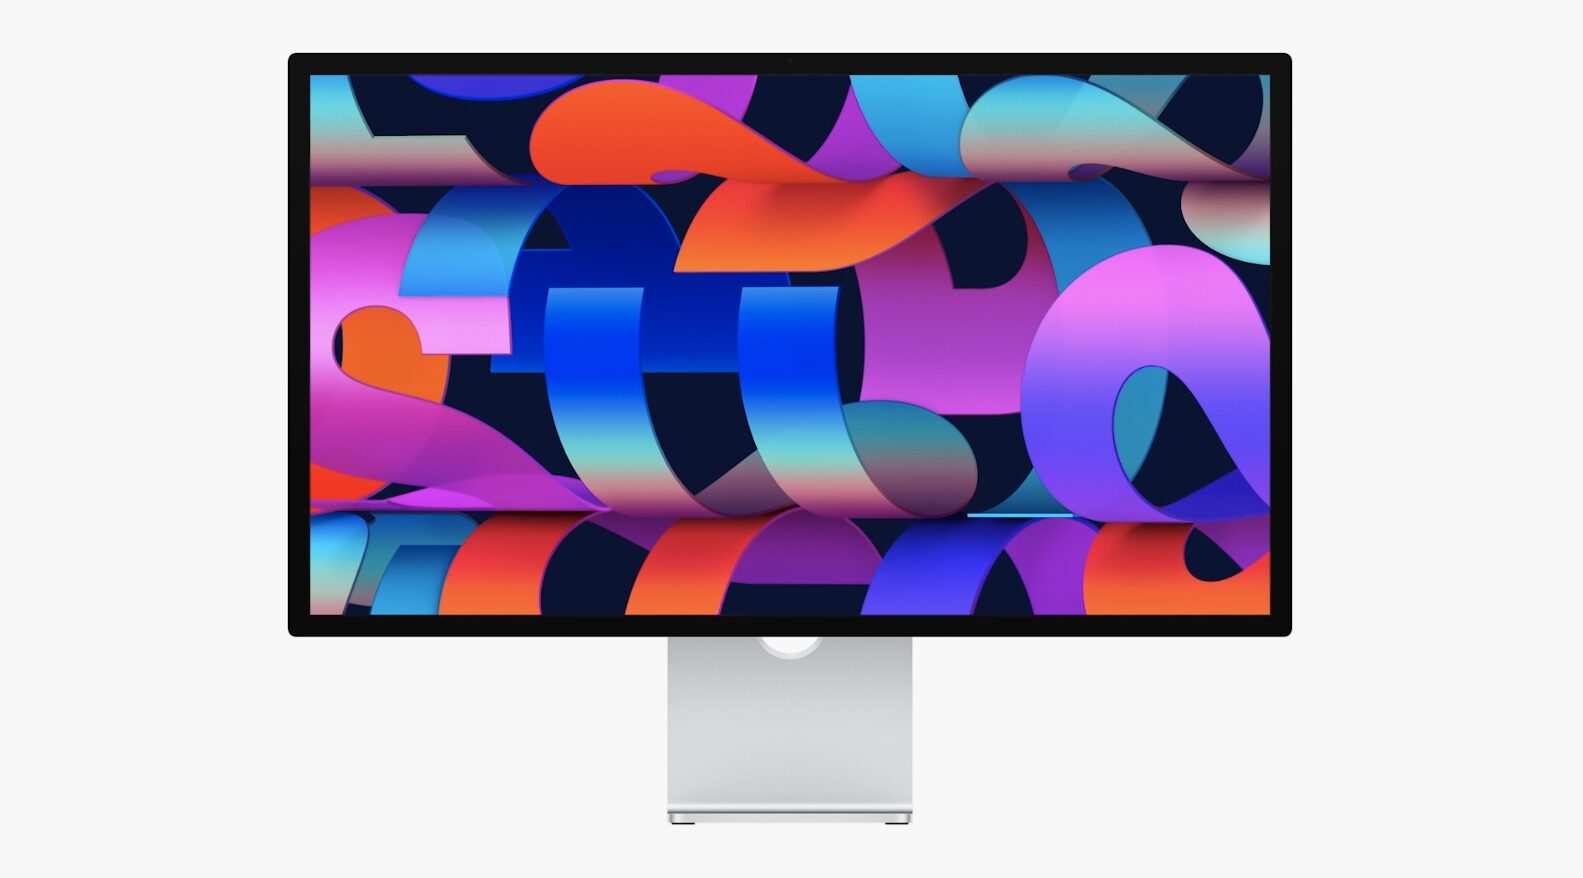 Marketing image showcasing the front of Apple's Studio Display external monitor 